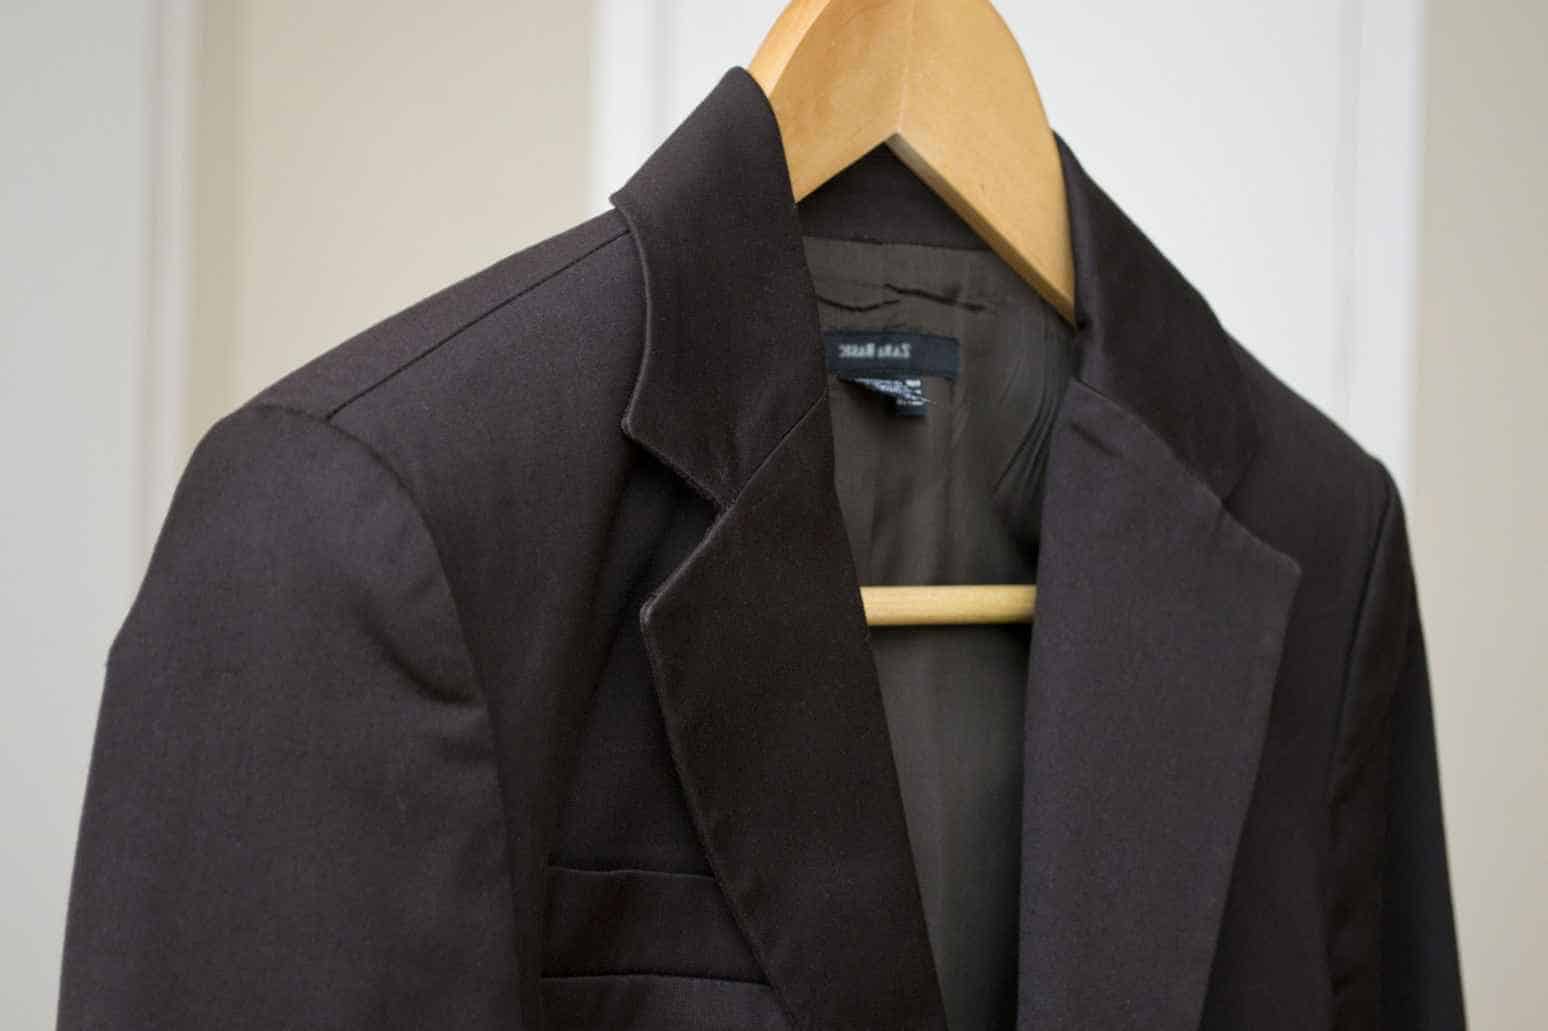 3 Methods to Wash a Suit at Home